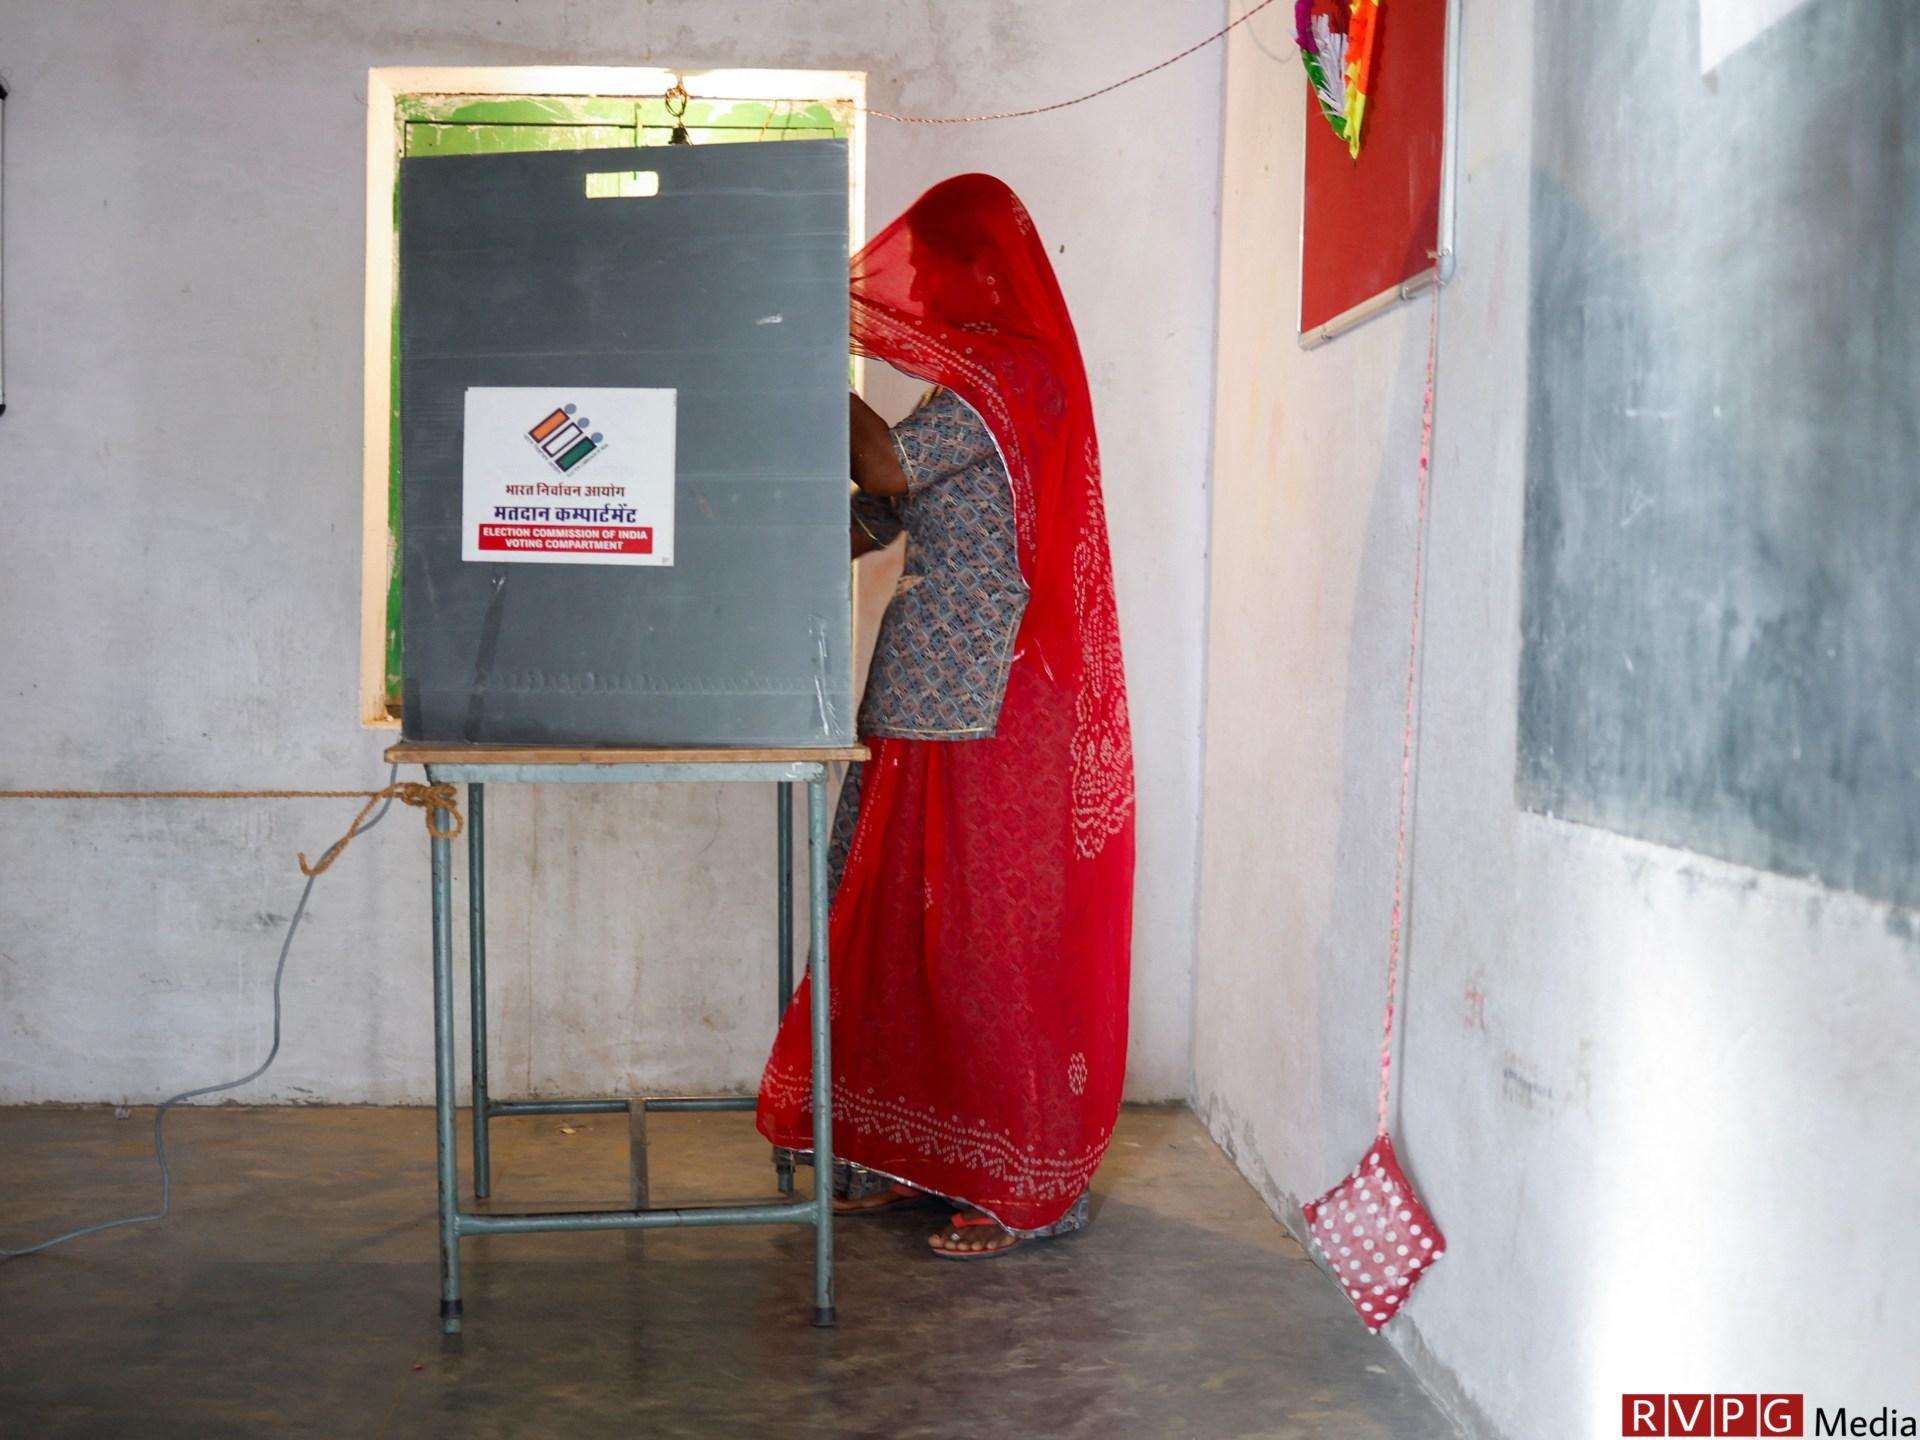 India votes in Phase 2 of mammoth election as Modi increases his campaign presence